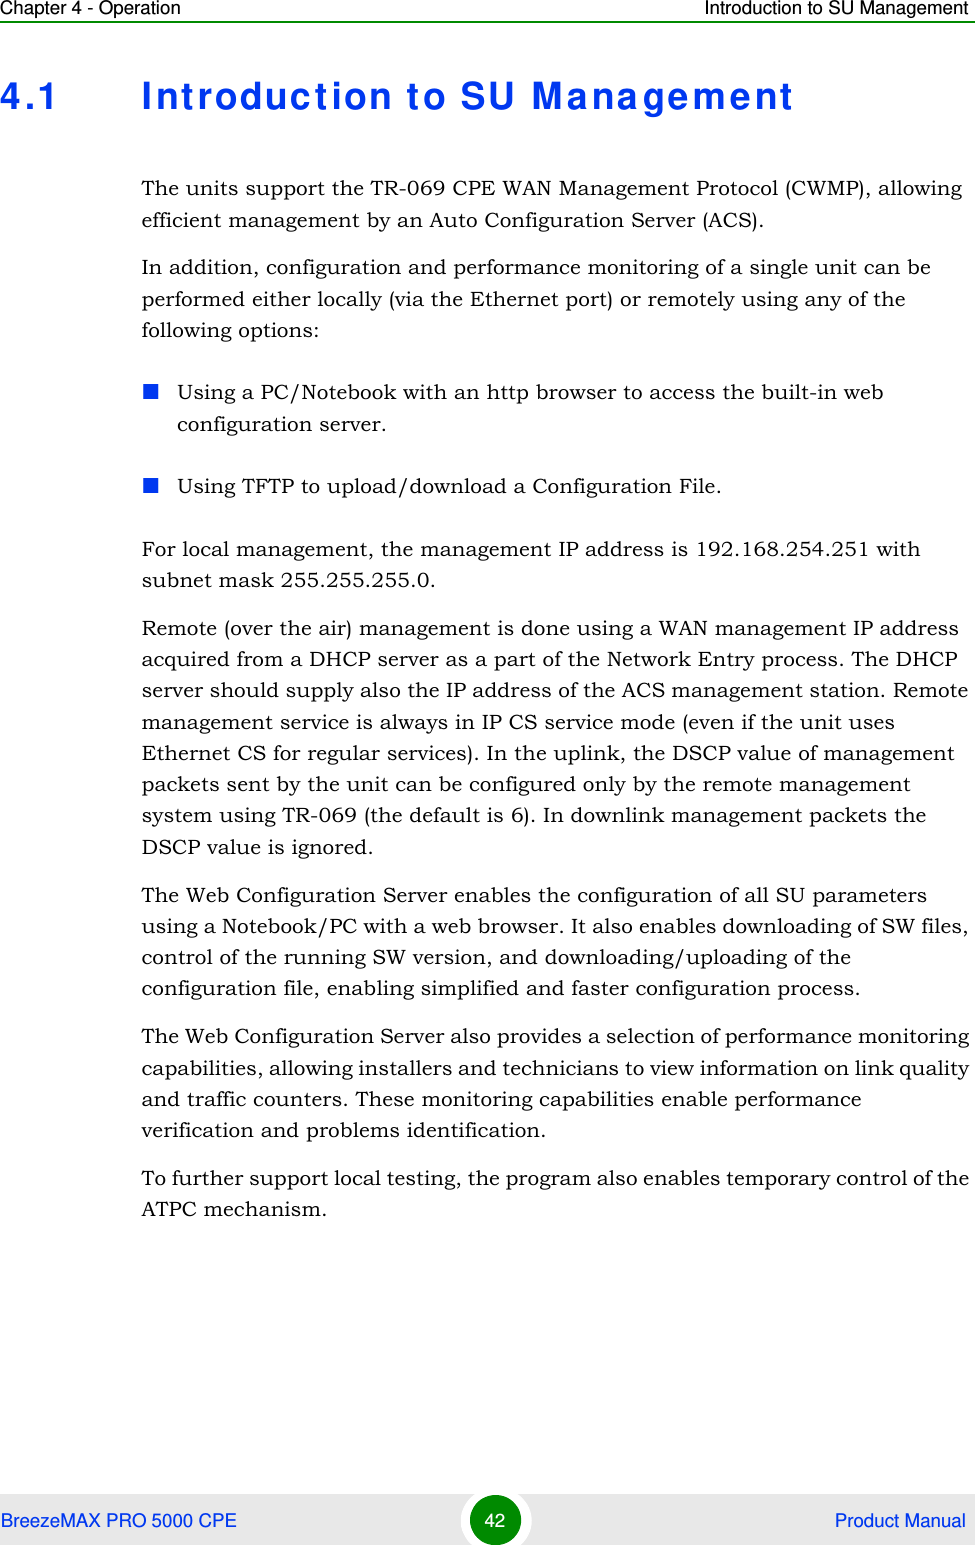 Chapter 4 - Operation Introduction to SU ManagementBreezeMAX PRO 5000 CPE 42  Product Manual4.1 Introduction to SU ManagementThe units support the TR-069 CPE WAN Management Protocol (CWMP), allowing efficient management by an Auto Configuration Server (ACS).In addition, configuration and performance monitoring of a single unit can be performed either locally (via the Ethernet port) or remotely using any of the following options:Using a PC/Notebook with an http browser to access the built-in web configuration server.Using TFTP to upload/download a Configuration File.For local management, the management IP address is 192.168.254.251 with subnet mask 255.255.255.0.Remote (over the air) management is done using a WAN management IP address acquired from a DHCP server as a part of the Network Entry process. The DHCP server should supply also the IP address of the ACS management station. Remote management service is always in IP CS service mode (even if the unit uses Ethernet CS for regular services). In the uplink, the DSCP value of management packets sent by the unit can be configured only by the remote management system using TR-069 (the default is 6). In downlink management packets the DSCP value is ignored.The Web Configuration Server enables the configuration of all SU parameters using a Notebook/PC with a web browser. It also enables downloading of SW files, control of the running SW version, and downloading/uploading of the configuration file, enabling simplified and faster configuration process.The Web Configuration Server also provides a selection of performance monitoring capabilities, allowing installers and technicians to view information on link quality and traffic counters. These monitoring capabilities enable performance verification and problems identification.To further support local testing, the program also enables temporary control of the ATPC mechanism.